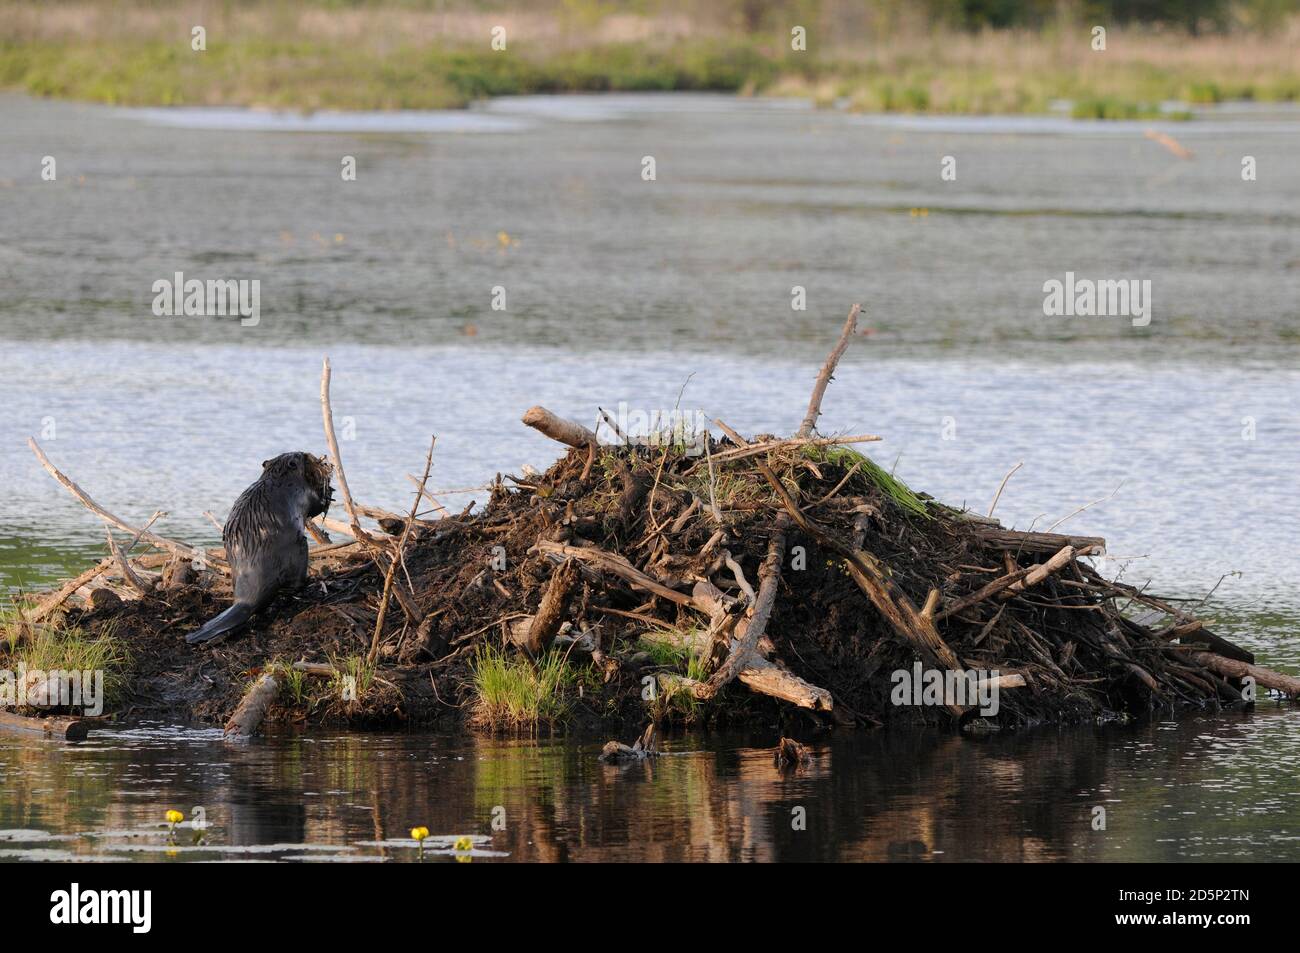 Beaver close-up profile rear view building a beaver lodge, displaying its brown fur, working skill  in its habitat and environment  water background. Stock Photo